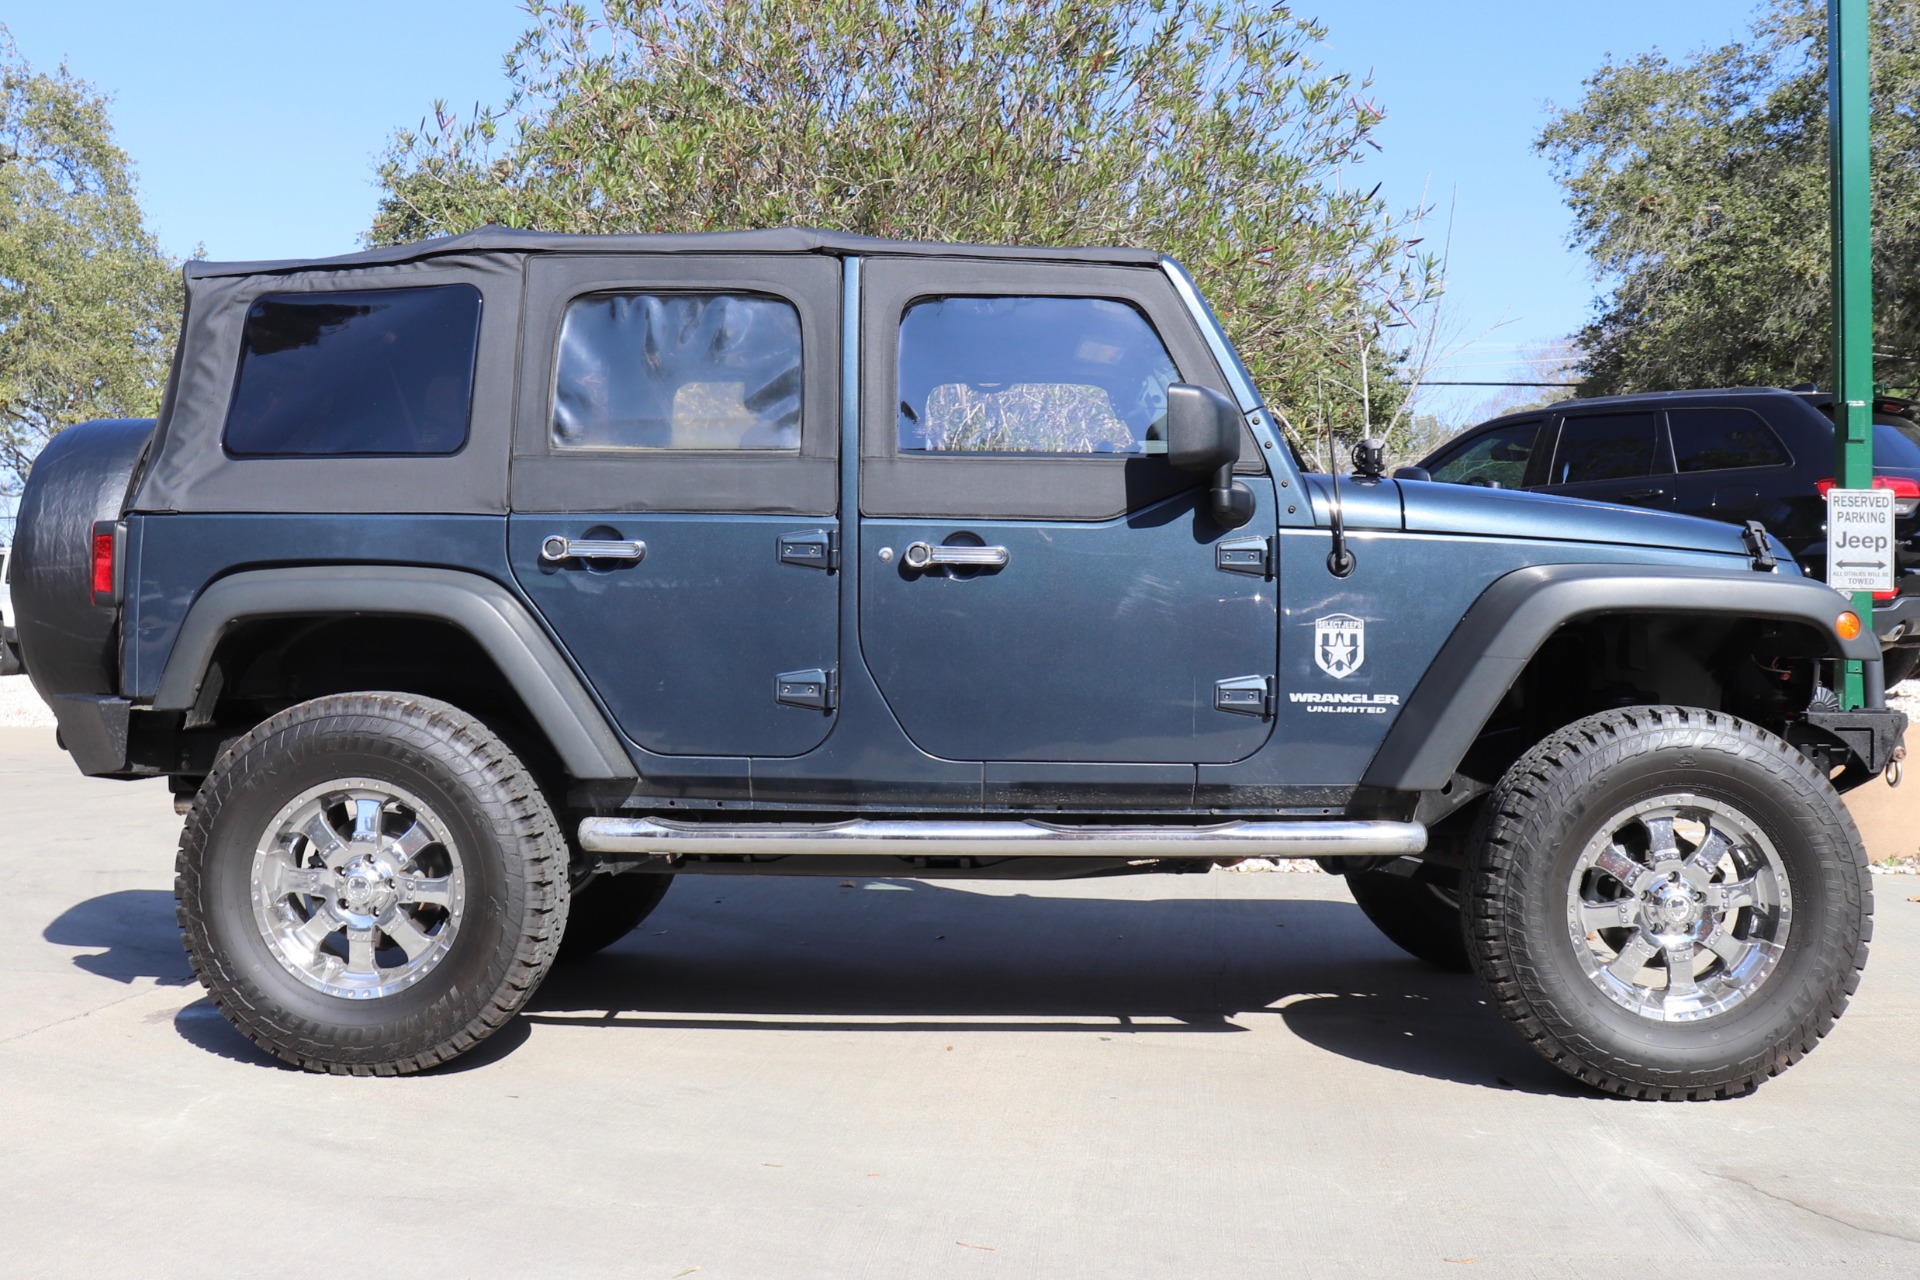 Used 2008 Jeep Wrangler Unlimited X For Sale ($21,995) | Select Jeeps Inc.  Stock #558339